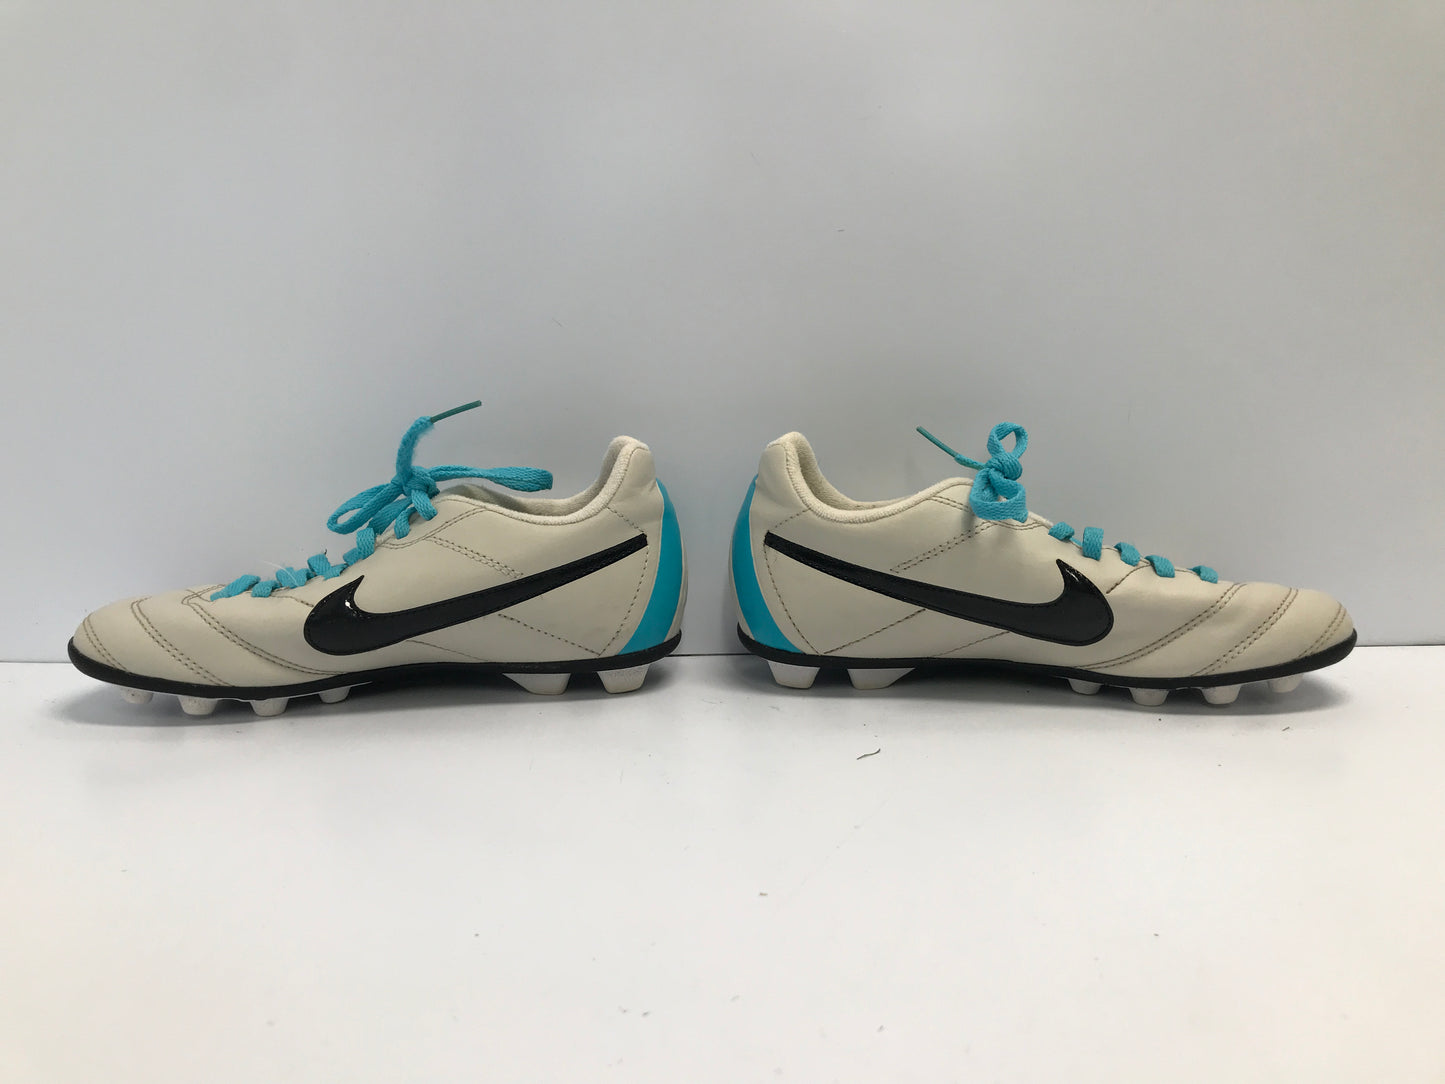 Soccer Shoes Cleats Child Size 3 Nike White Black Blue